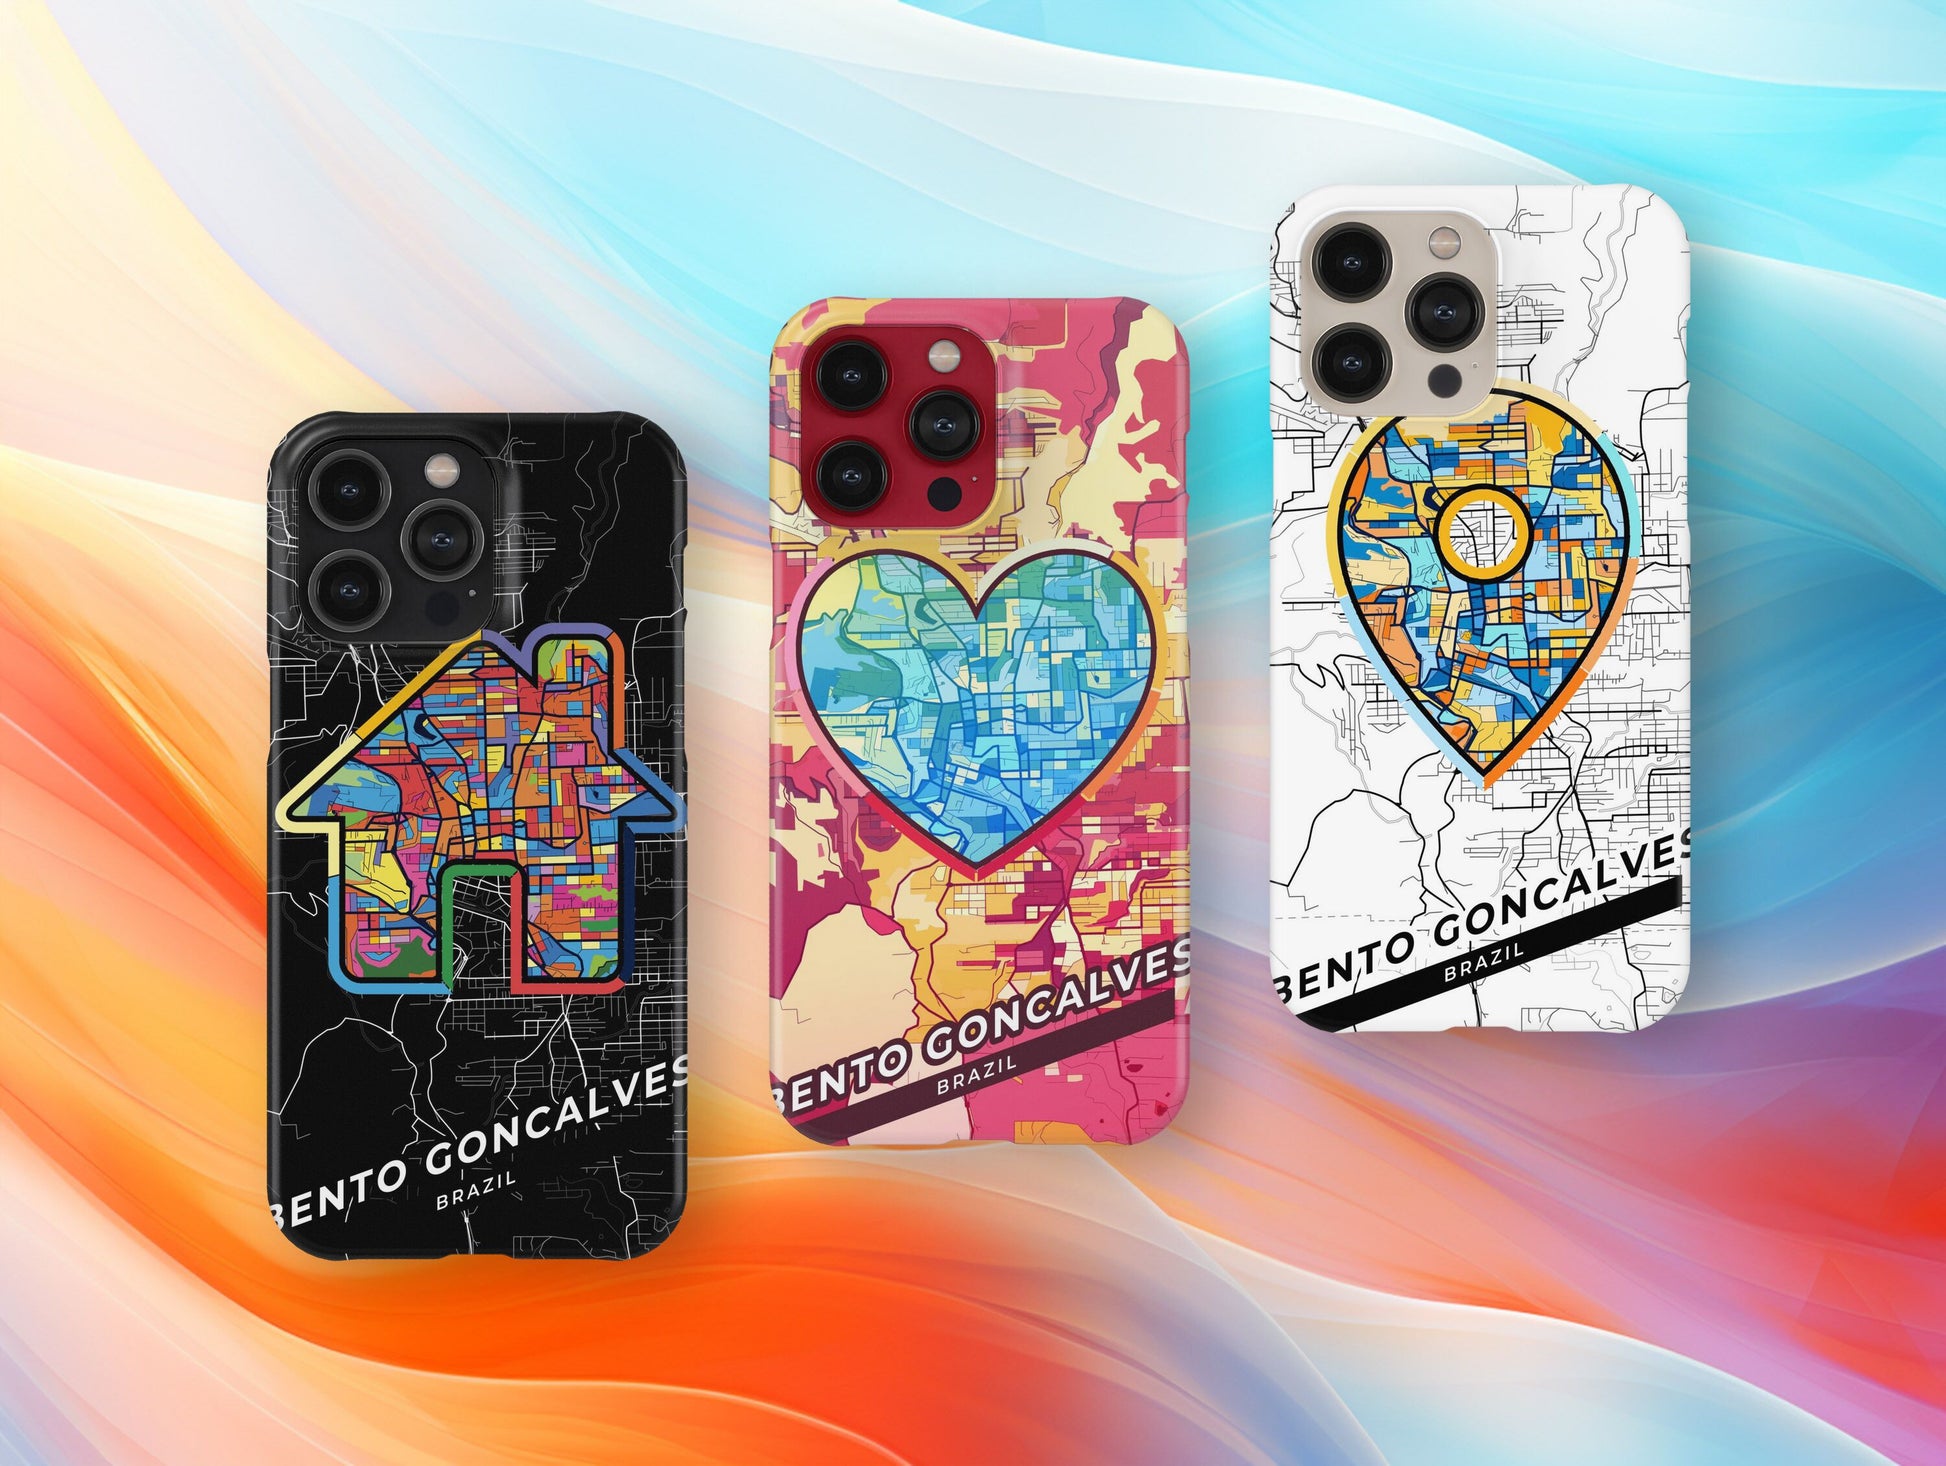 Bento Goncalves Brazil slim phone case with colorful icon. Birthday, wedding or housewarming gift. Couple match cases.